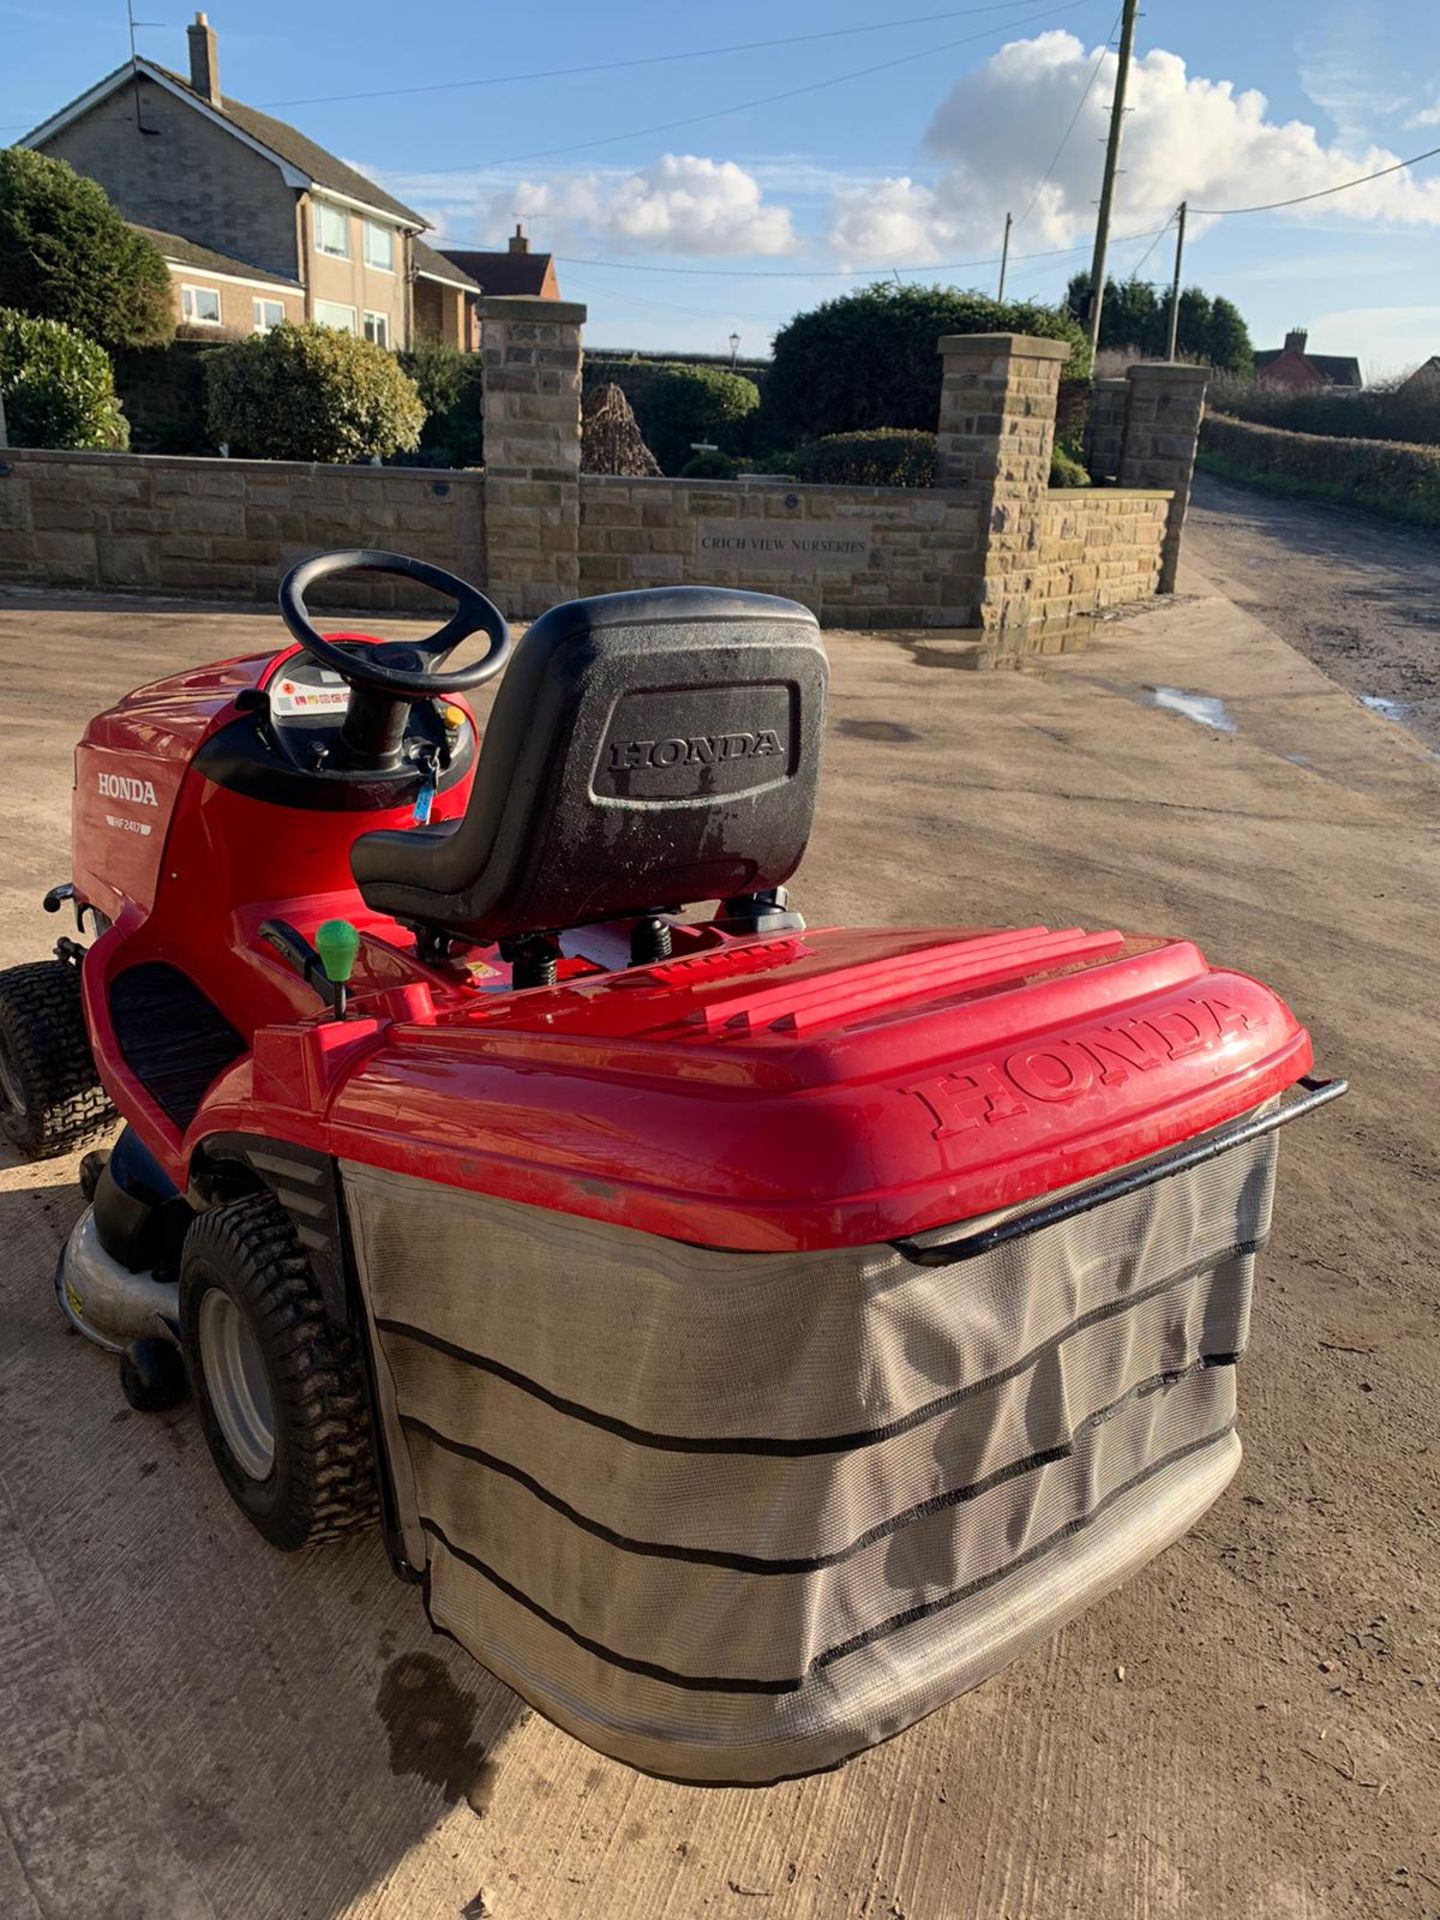 HONDA HF2417 RIDE ON MOWER, RUNS, DRIVES AND CUTS, CLEAN MACHINE, NEW SHAPE, LOW 61 HOURS *NO VAT* - Image 2 of 5